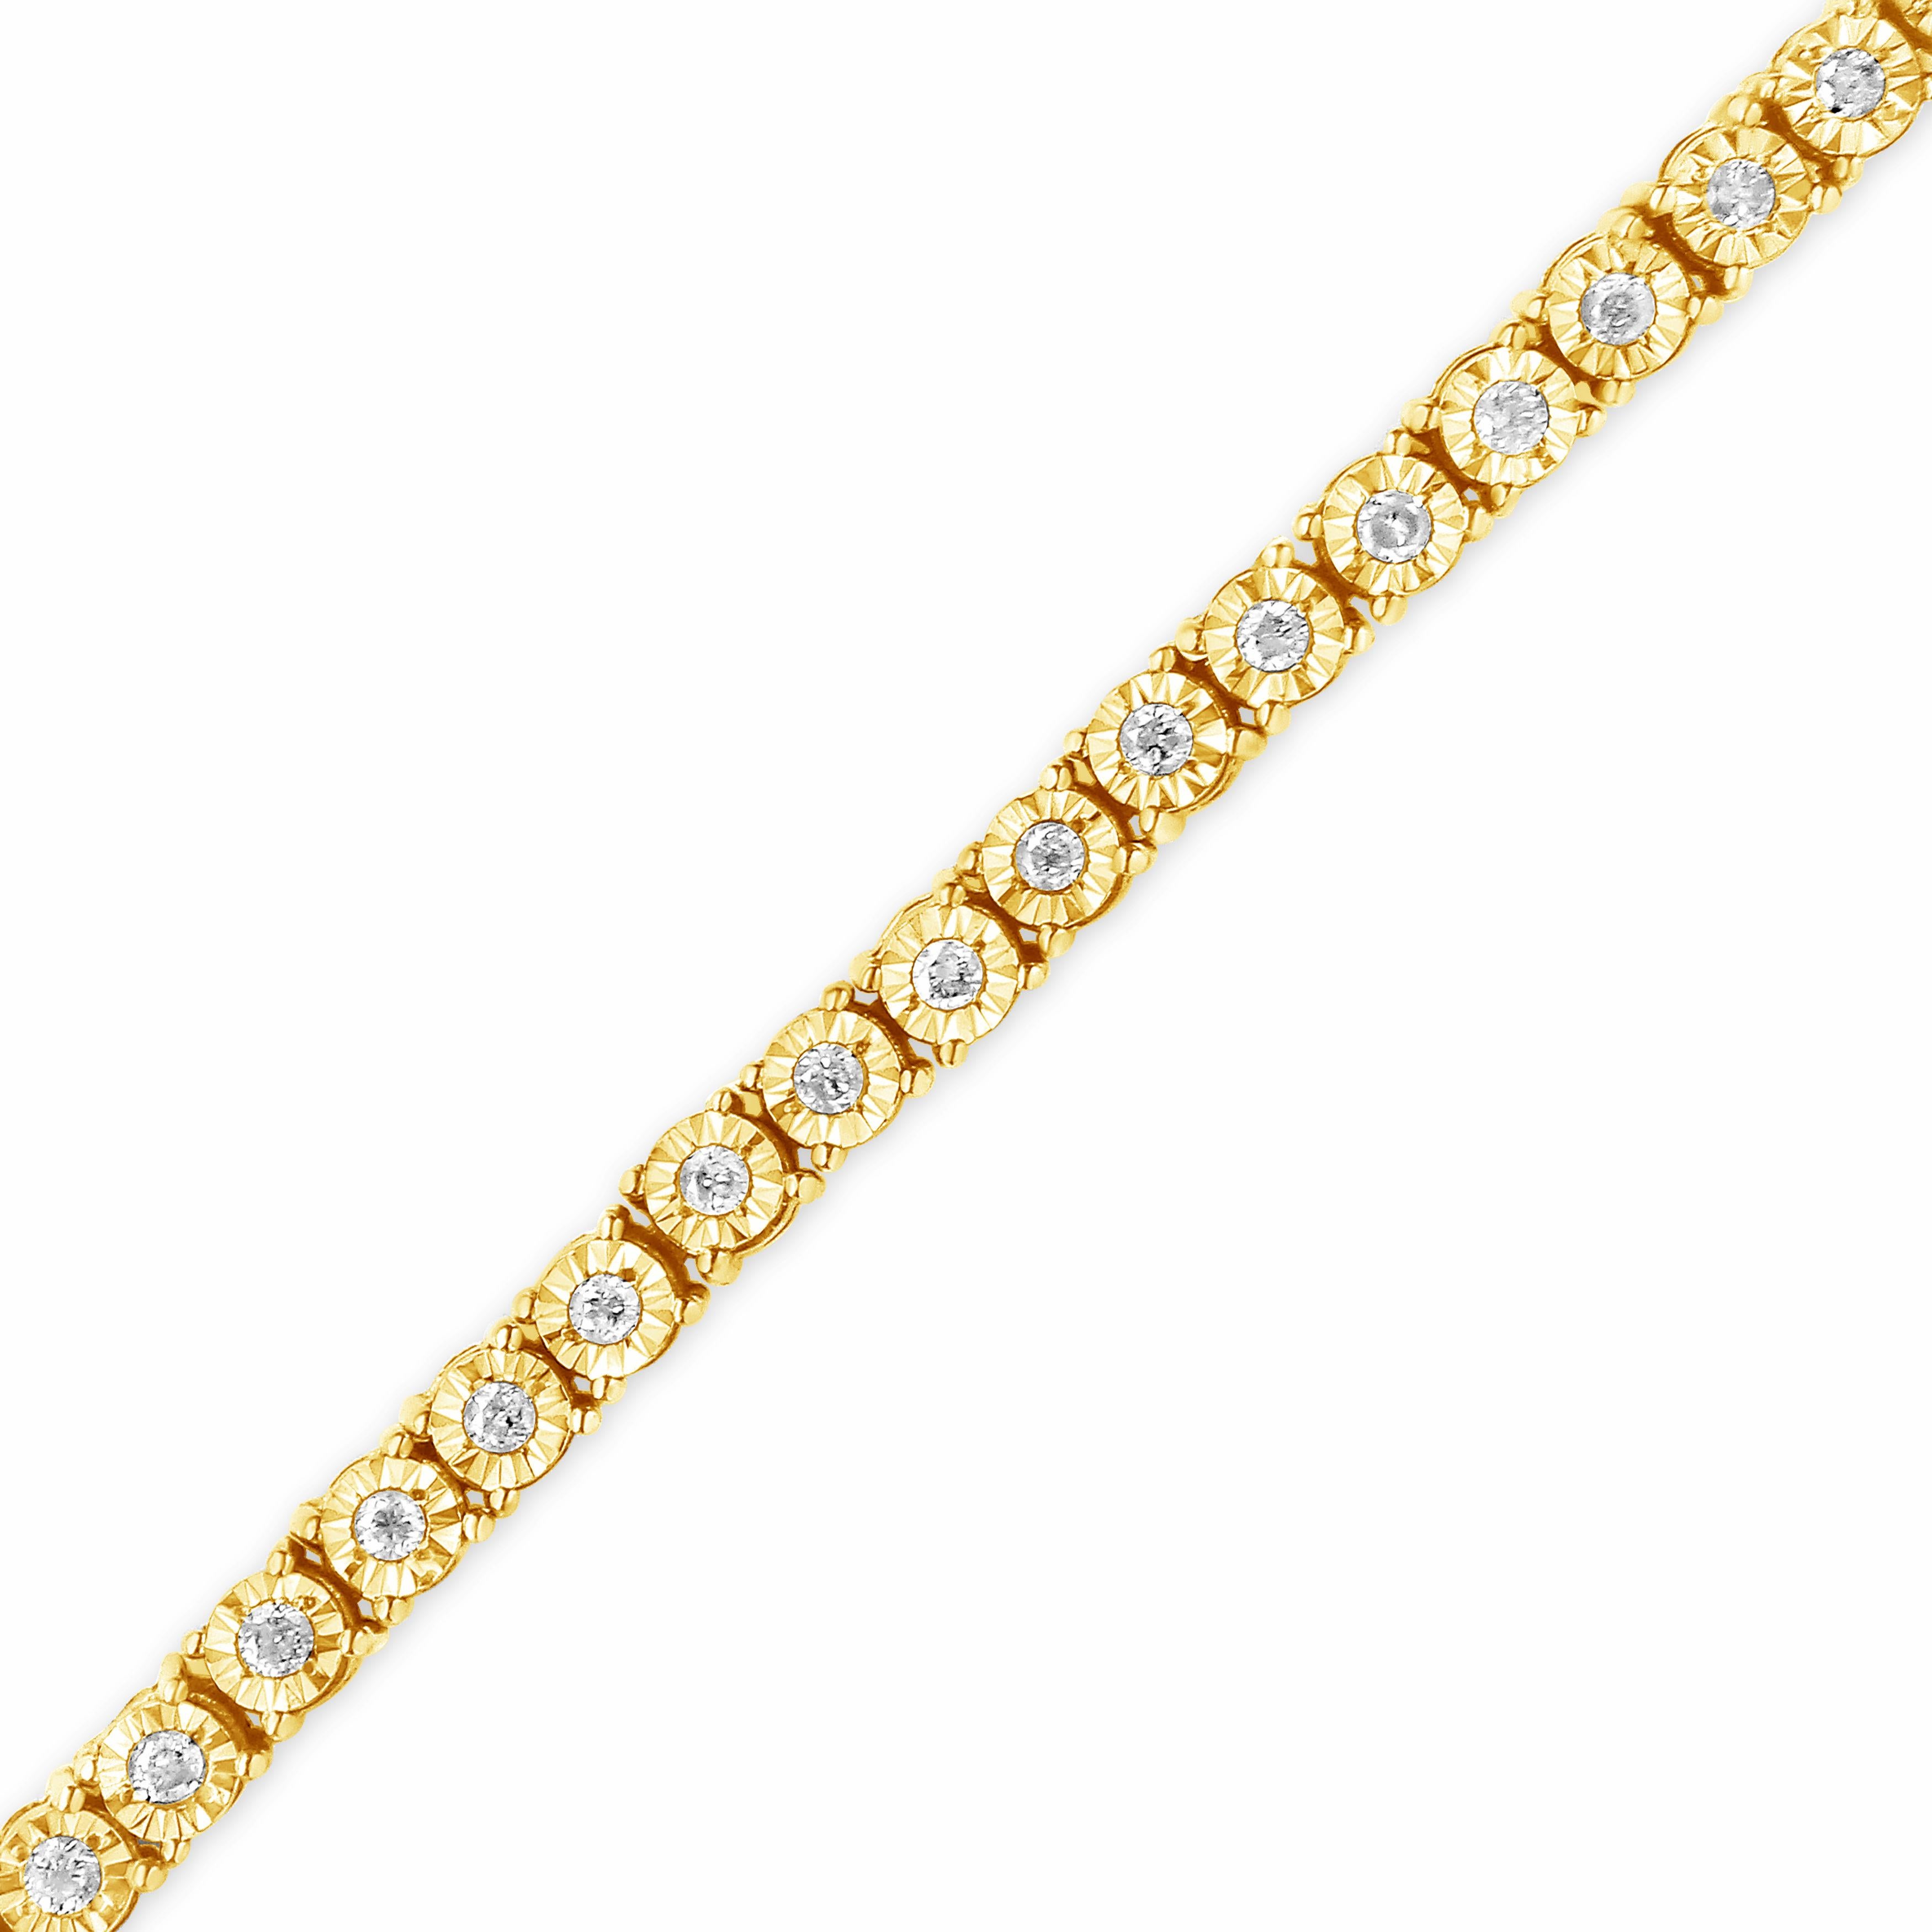 10K Yellow Gold over Silver 1.0 Cttw Diamond Round Faceted Bezel Tennis Bracelet In New Condition For Sale In New York, NY